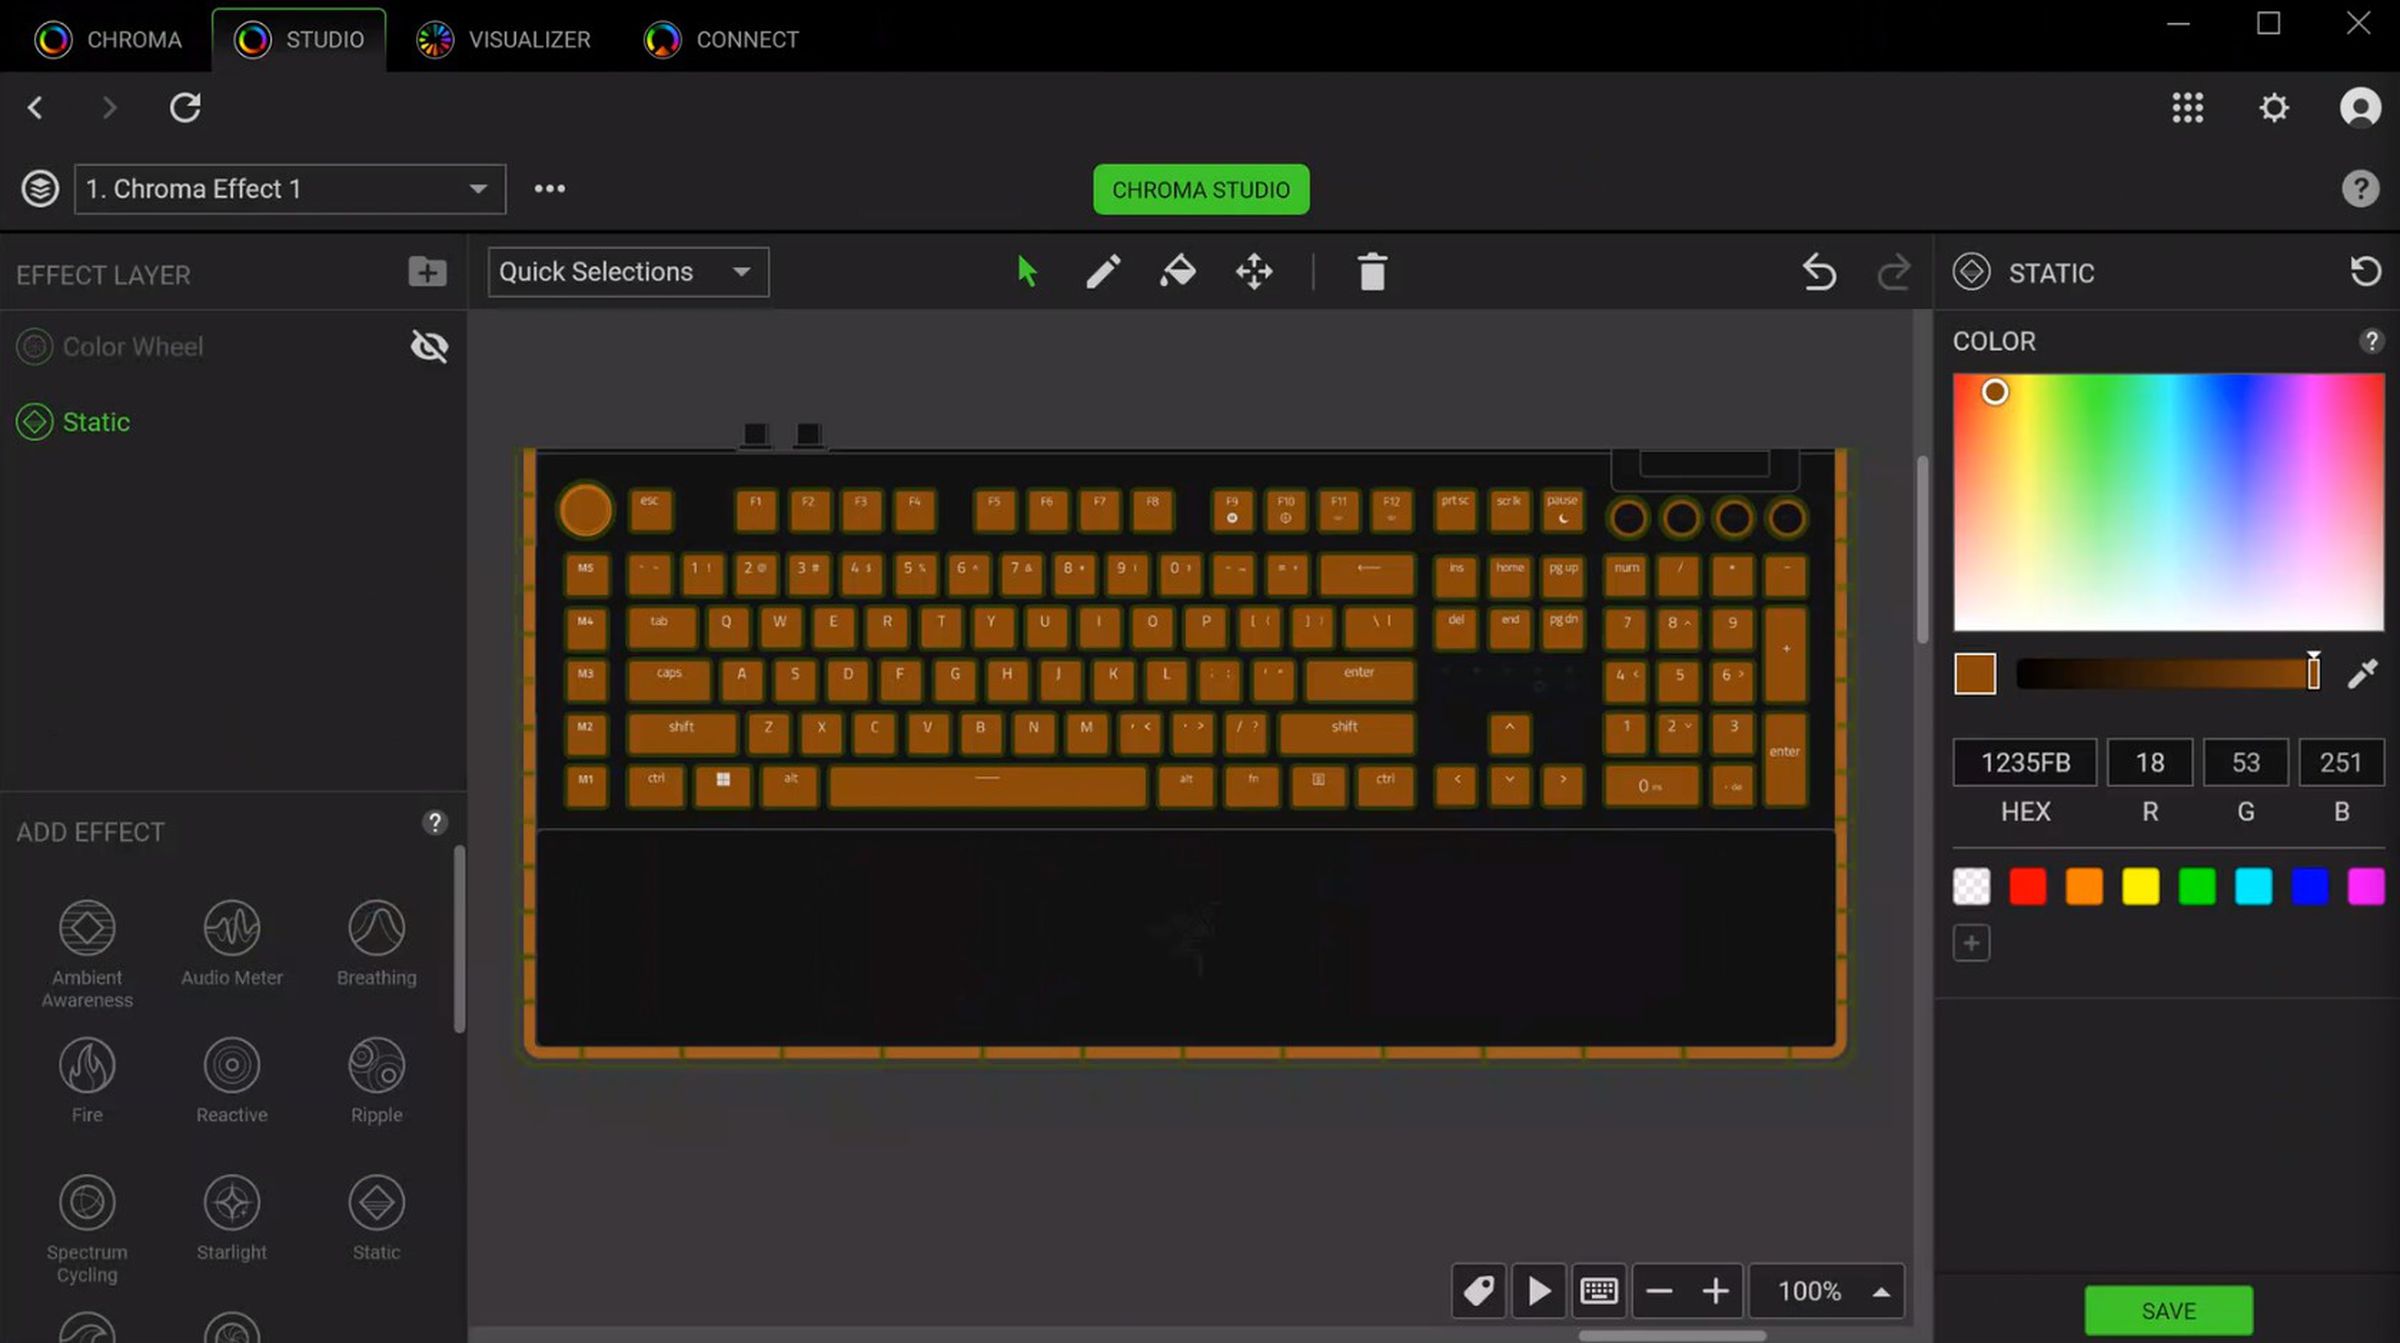 A look at the standalone Chroma.